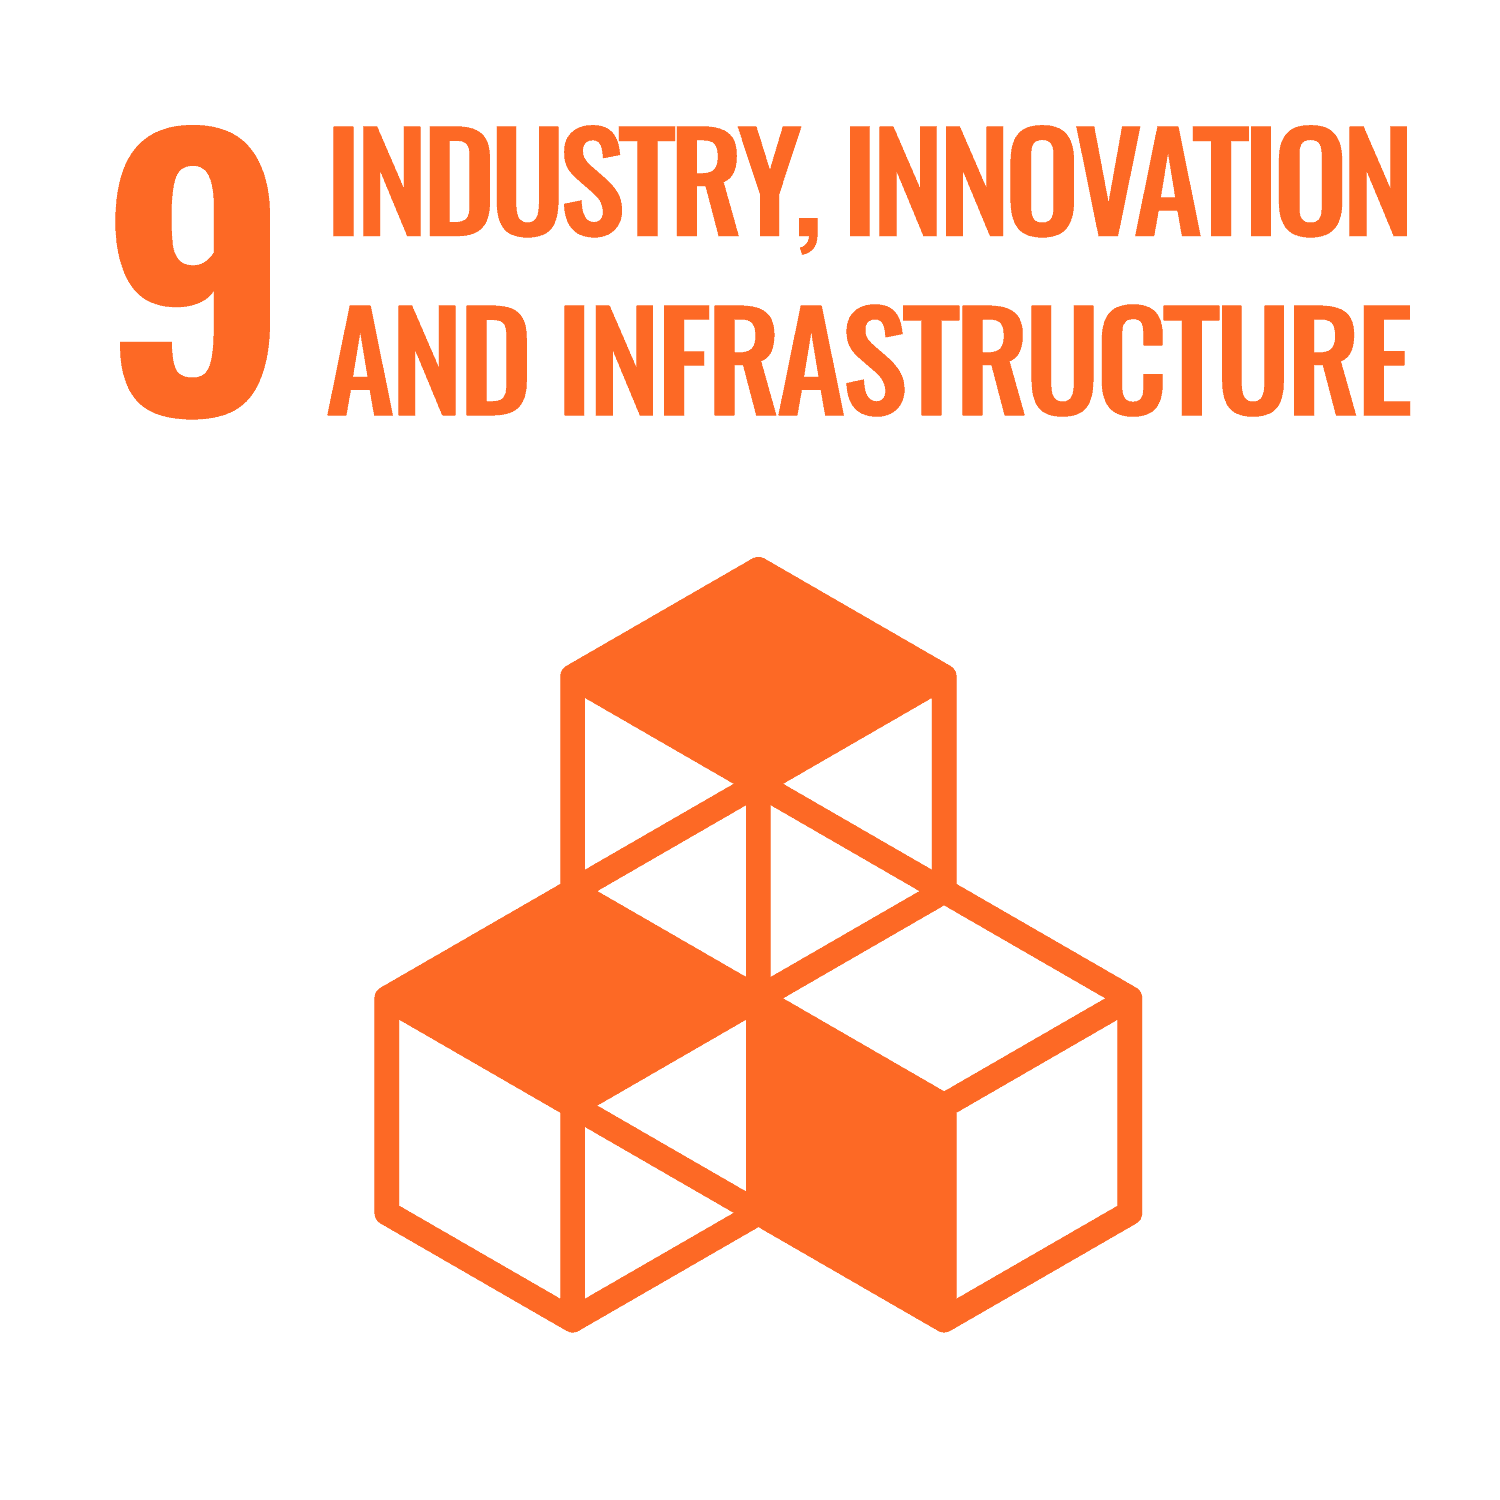 9 industry, innovation and infrastructure